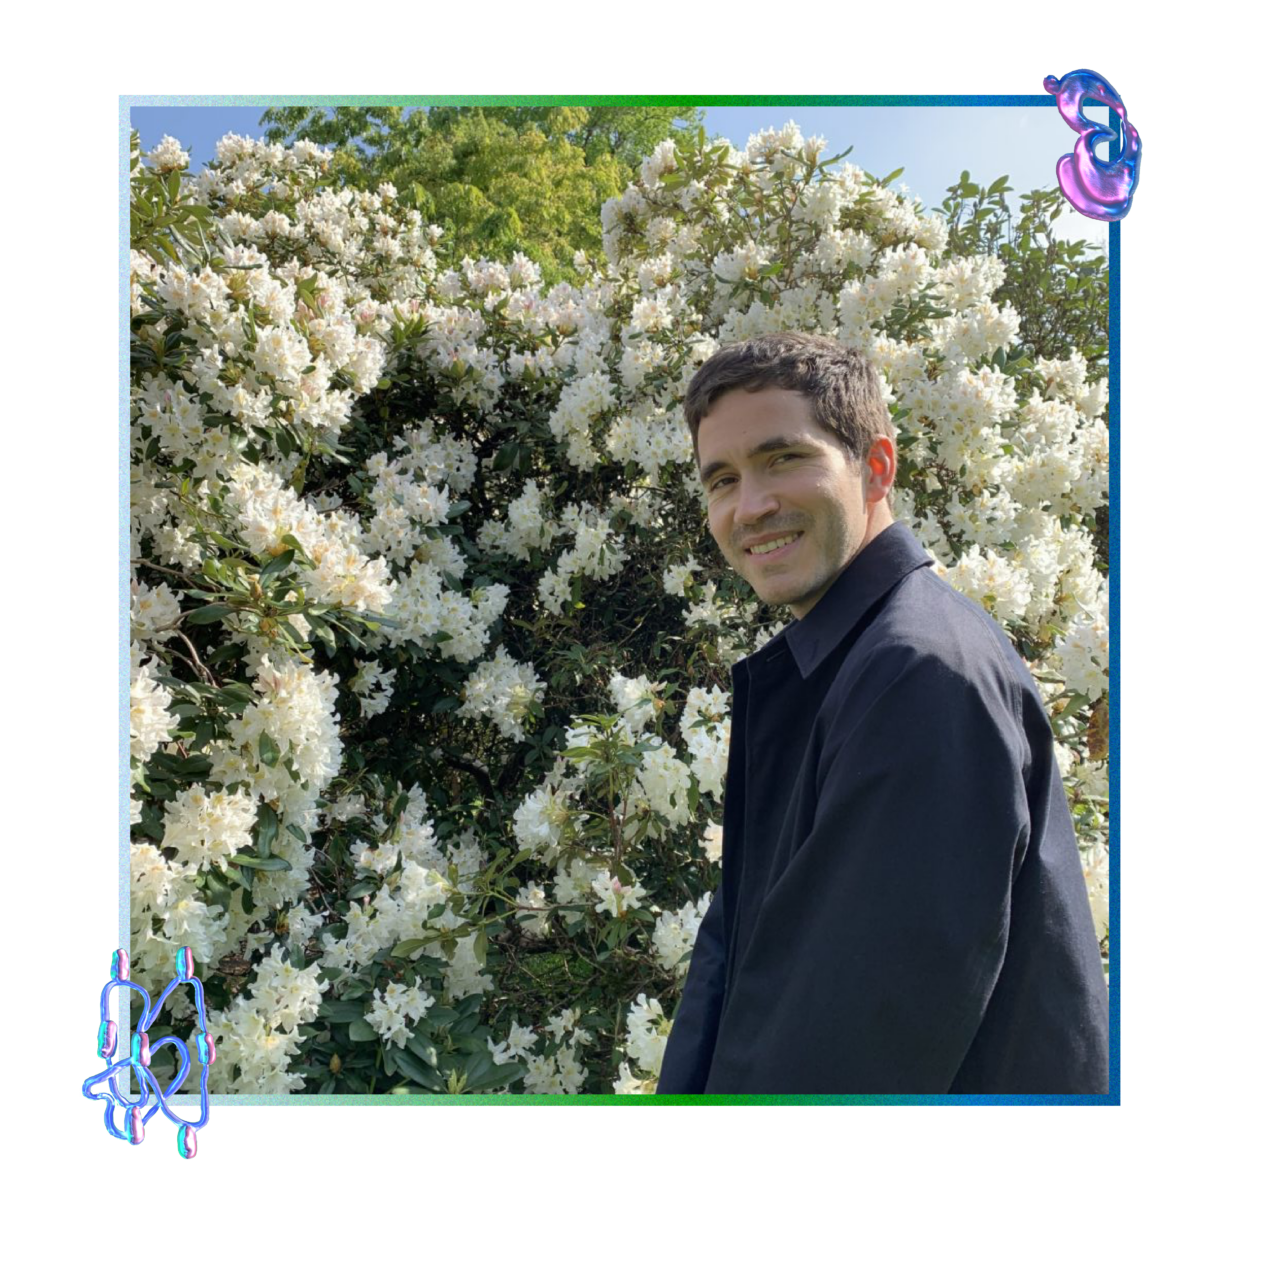 The picture is a portrait of myself made by my partner Ellen Lapper. I'm standing in front of a beautiful blossomed tree and I'm facing the camera.